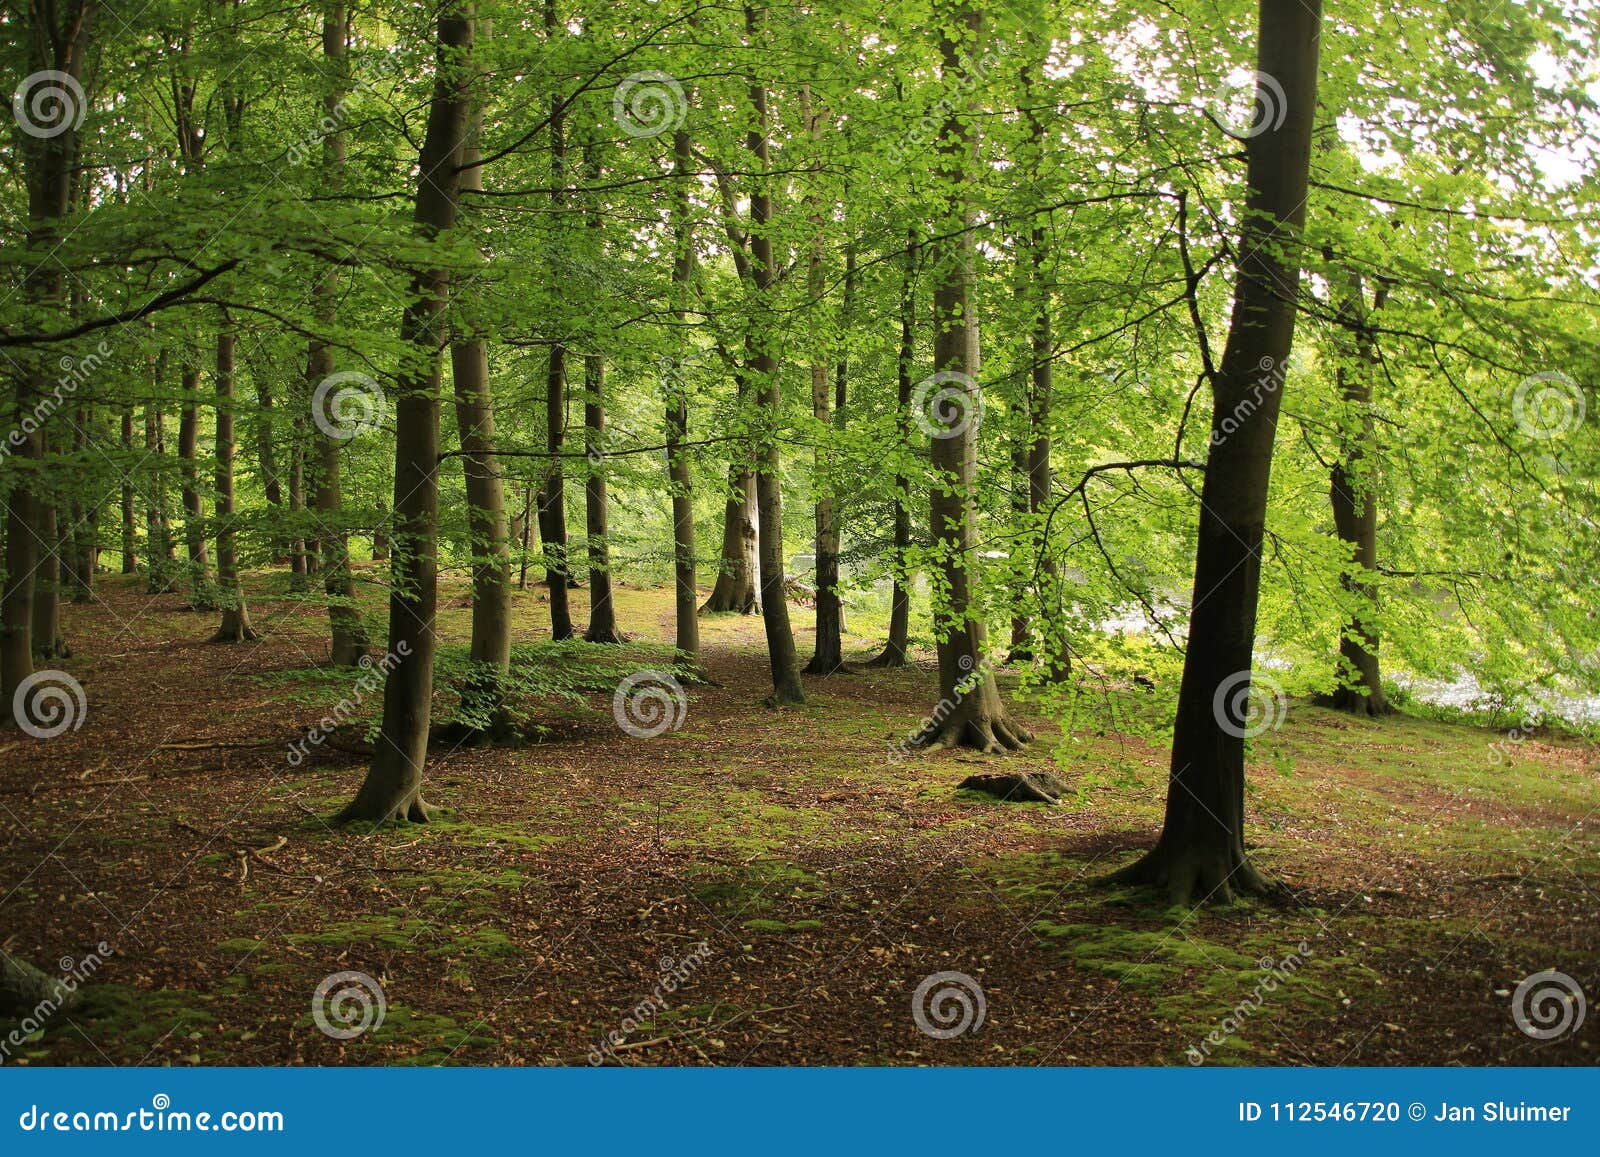 forest with trunks of beeches in the park.